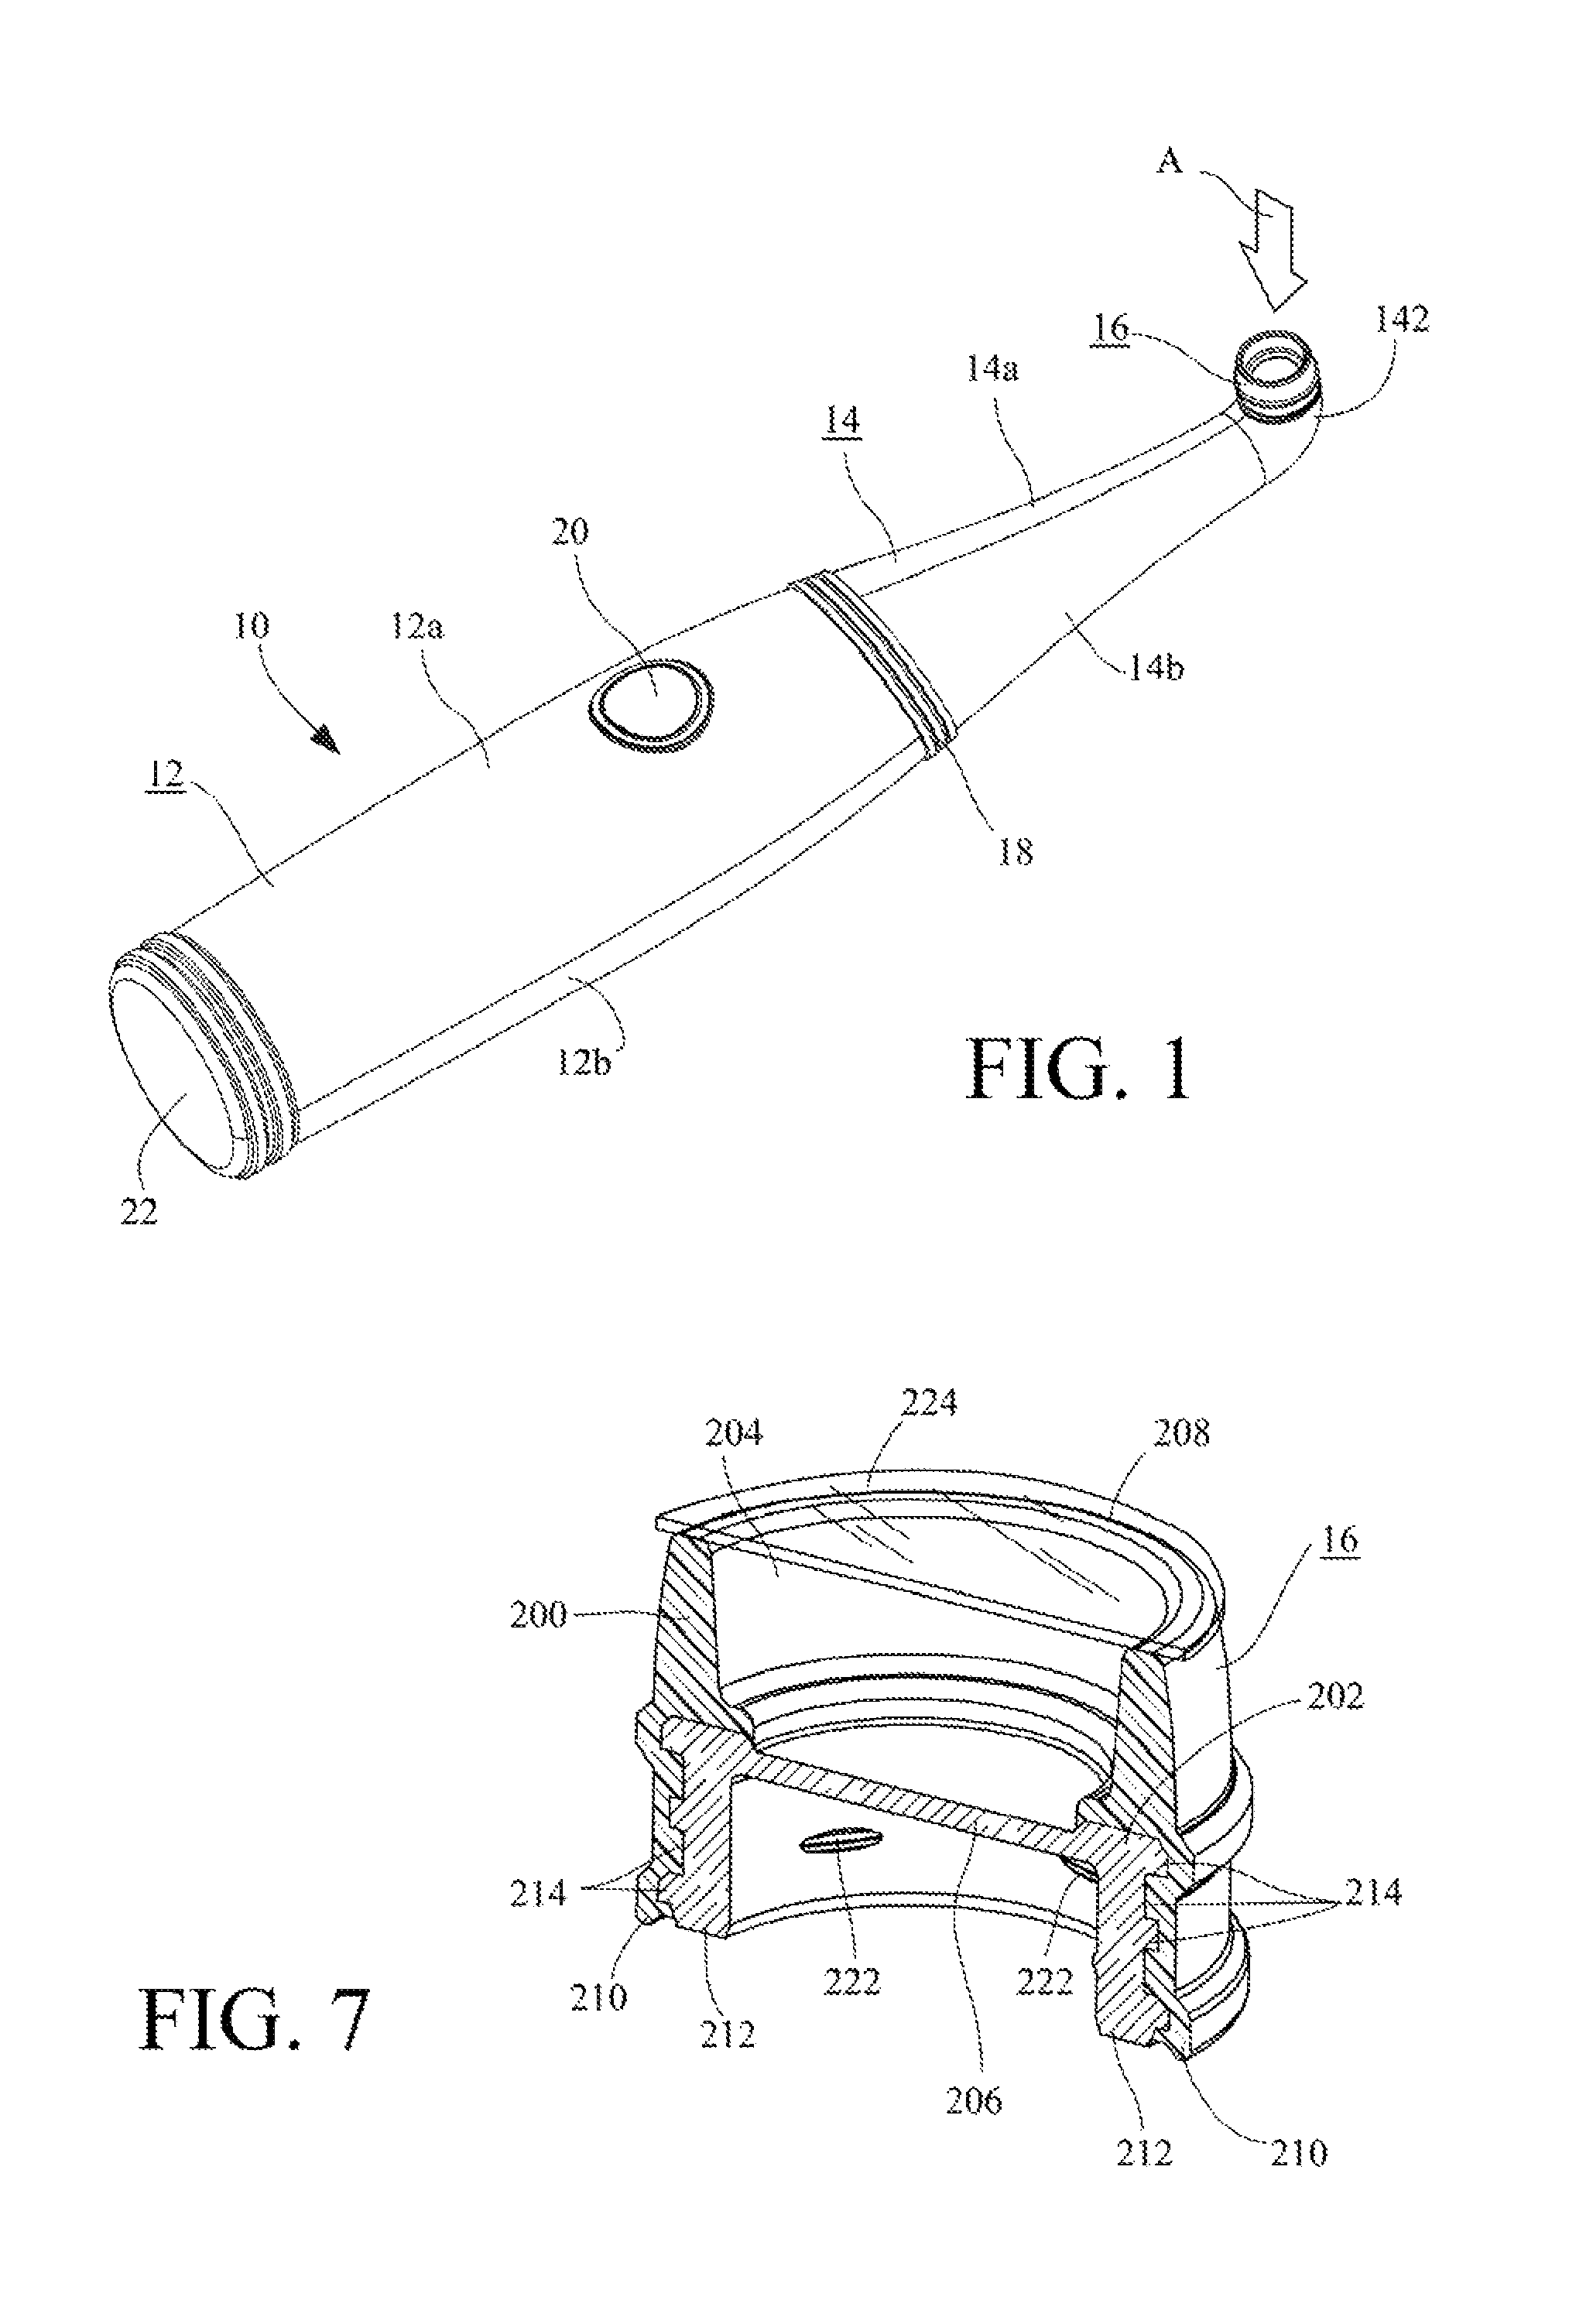 Hand-held tooth whitening instrument with applicator reservoir for whitening composition and methods of using same